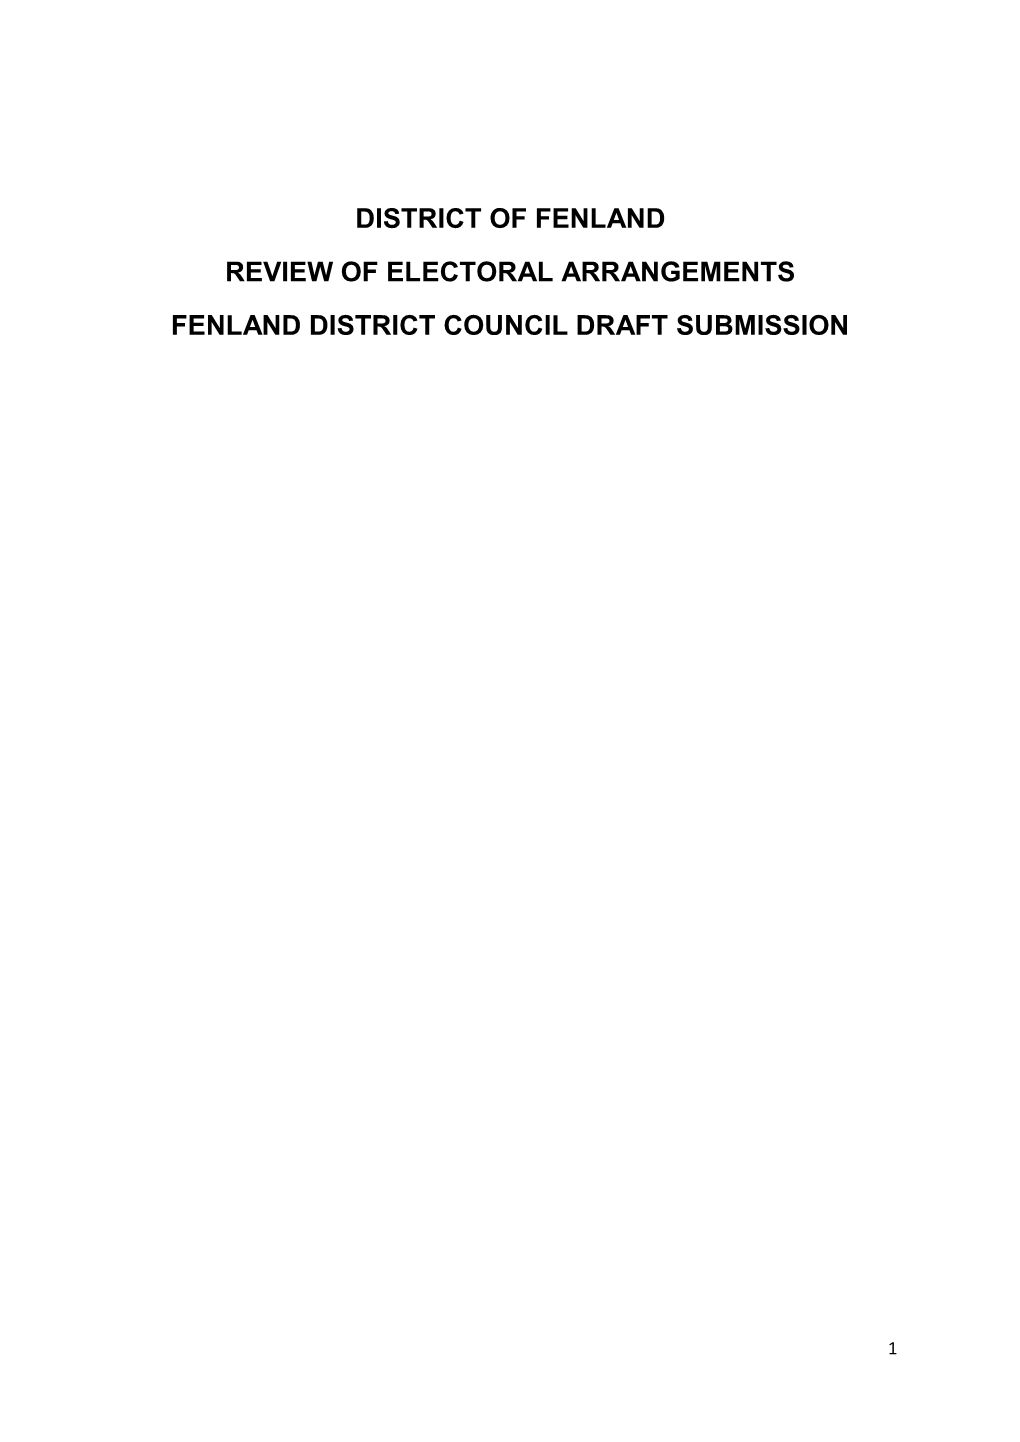 District of Fenland Review of Electoral Arrangements Fenland District Council Draft Submission